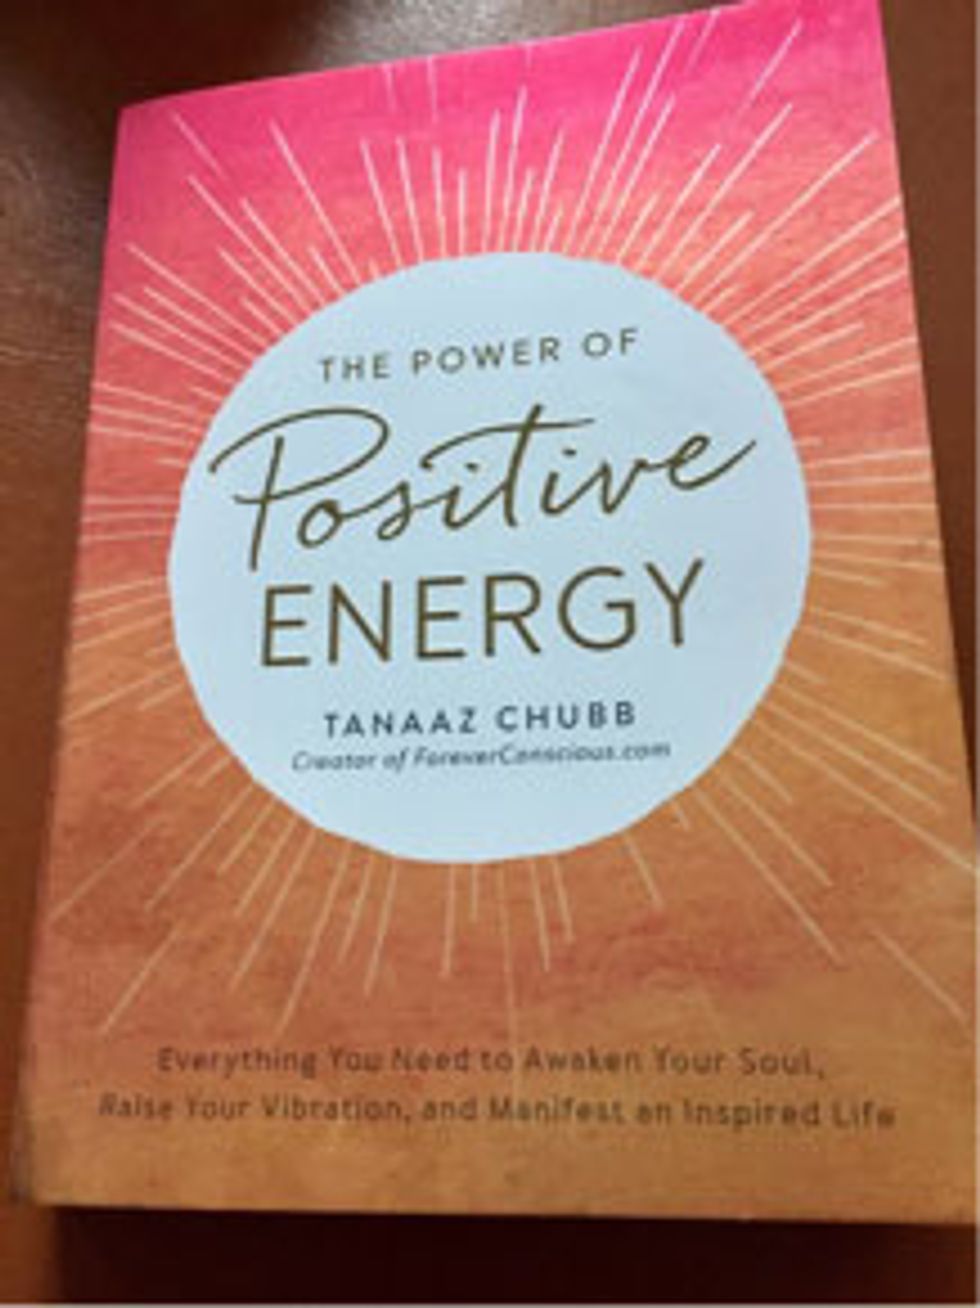 The Power of Positive Energy book cover